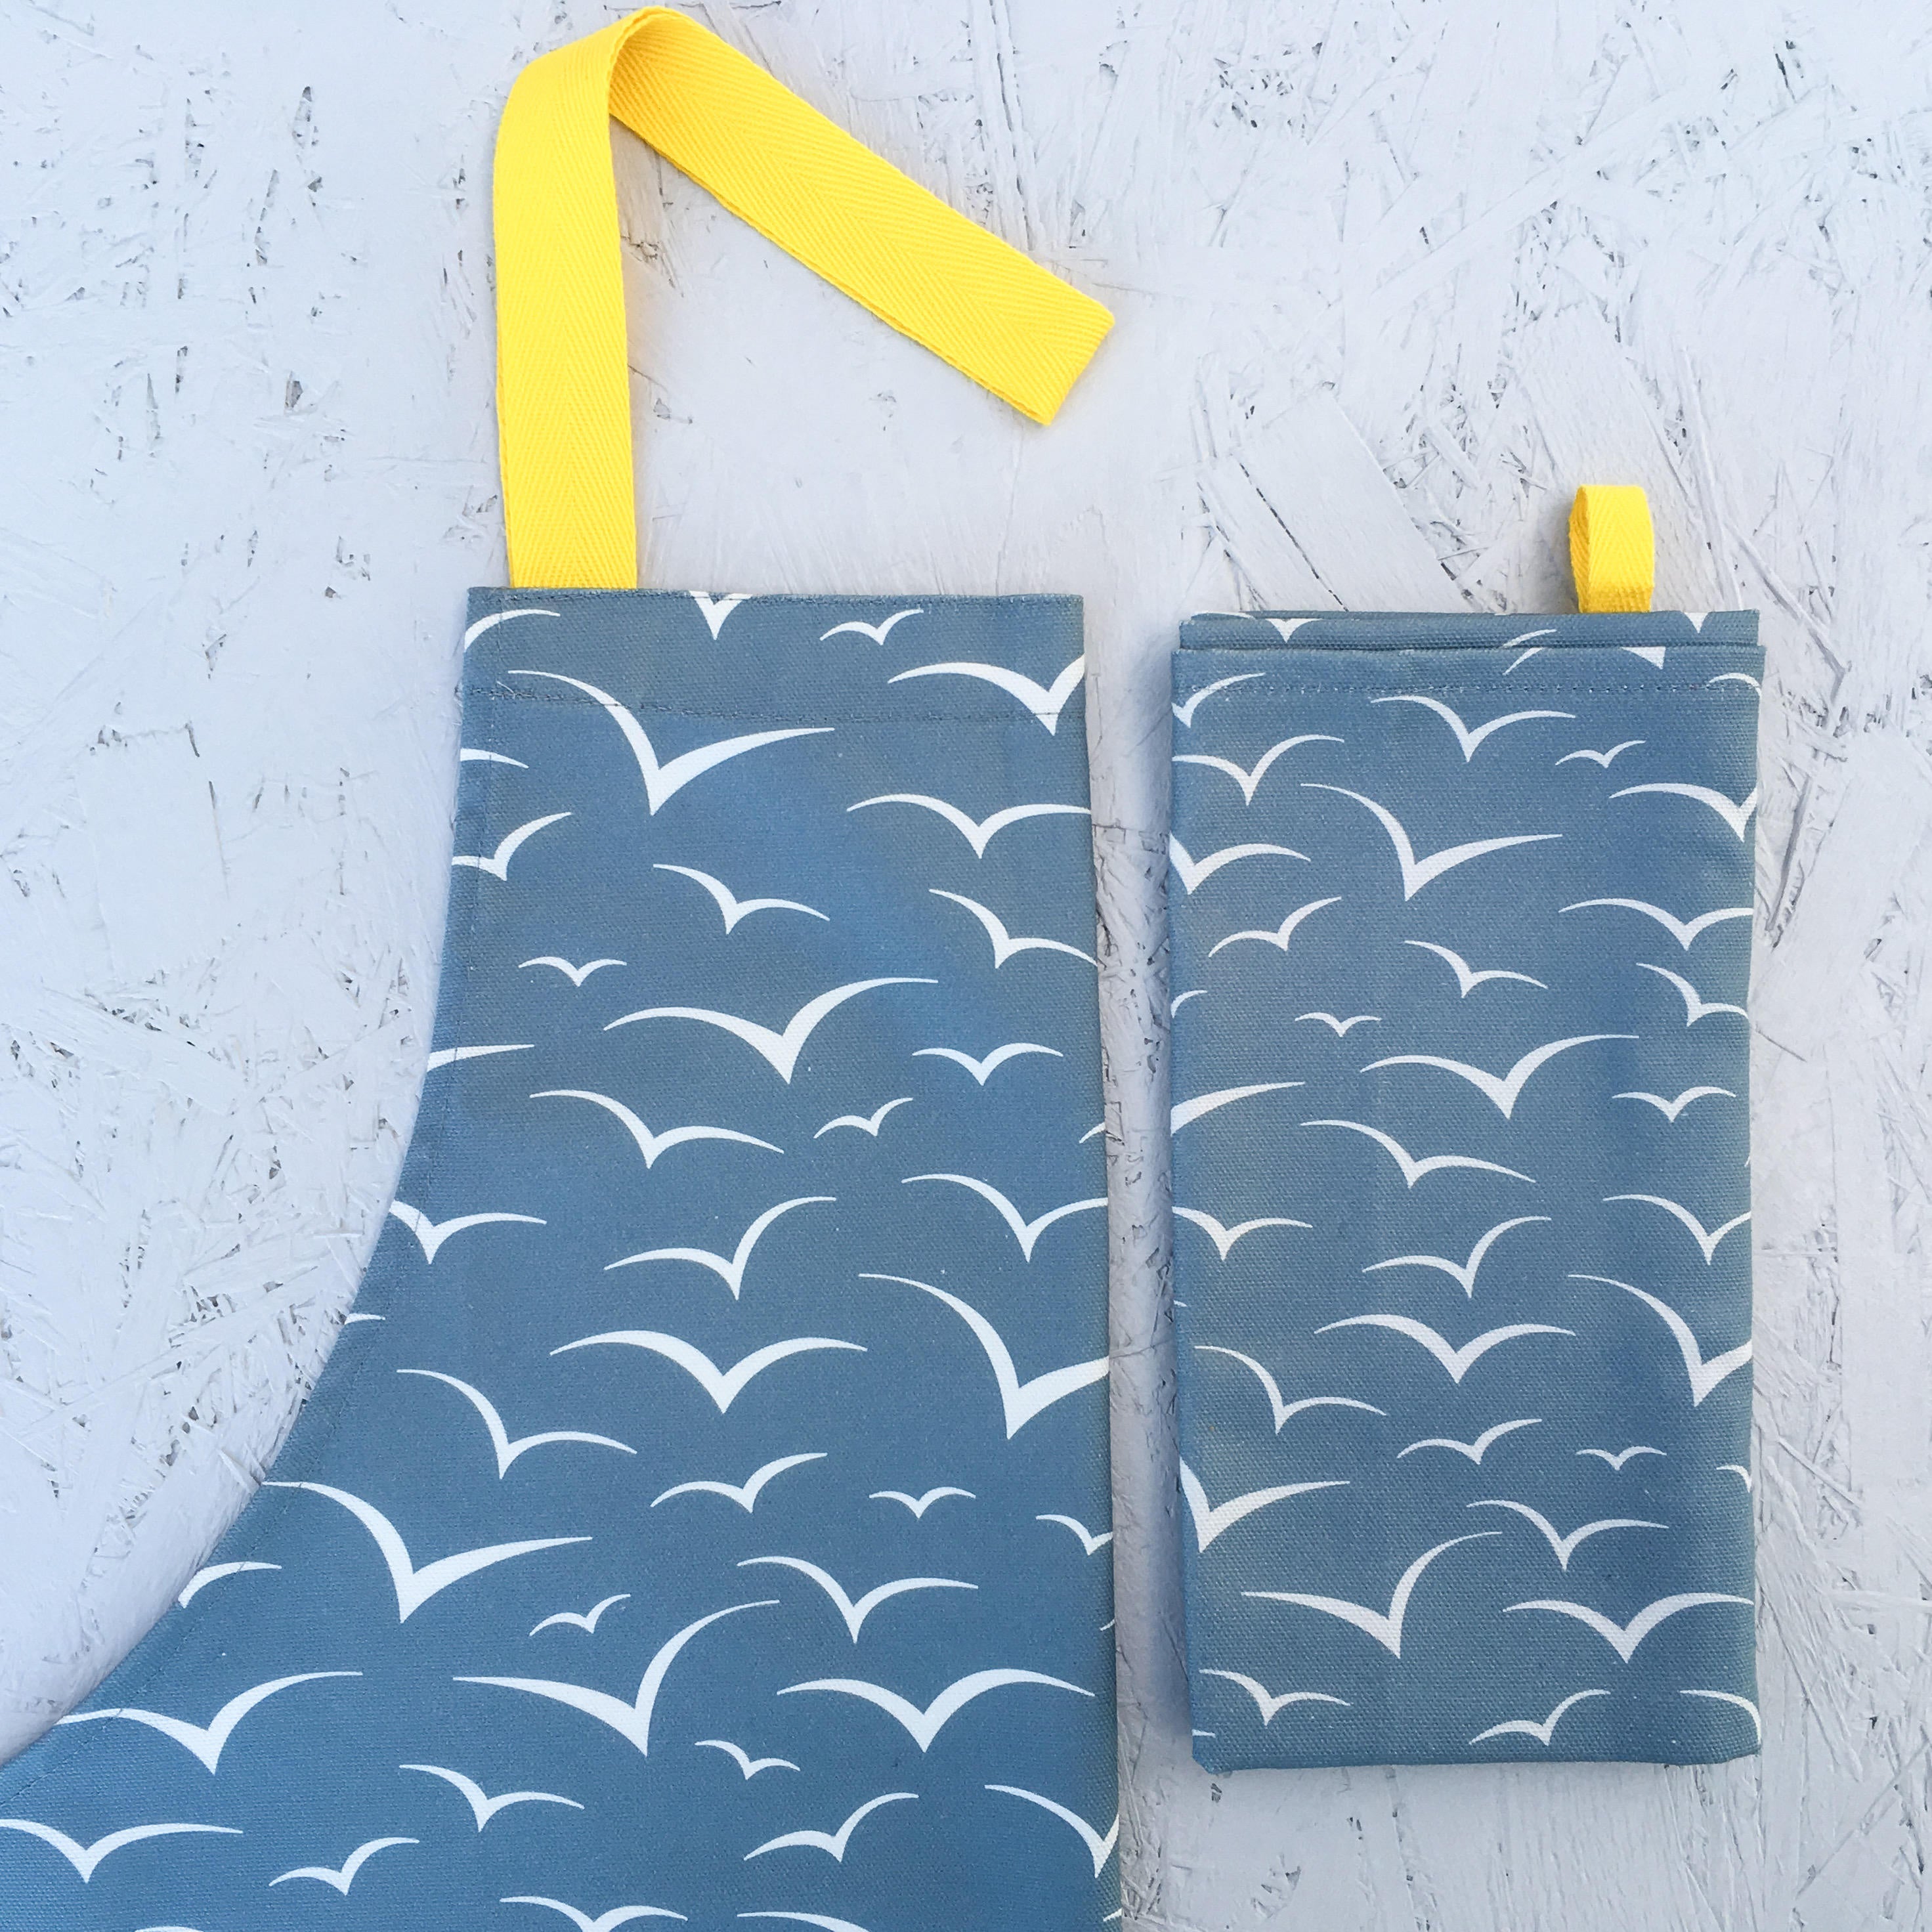 Apron | seagulls print with contrasting yellow ties